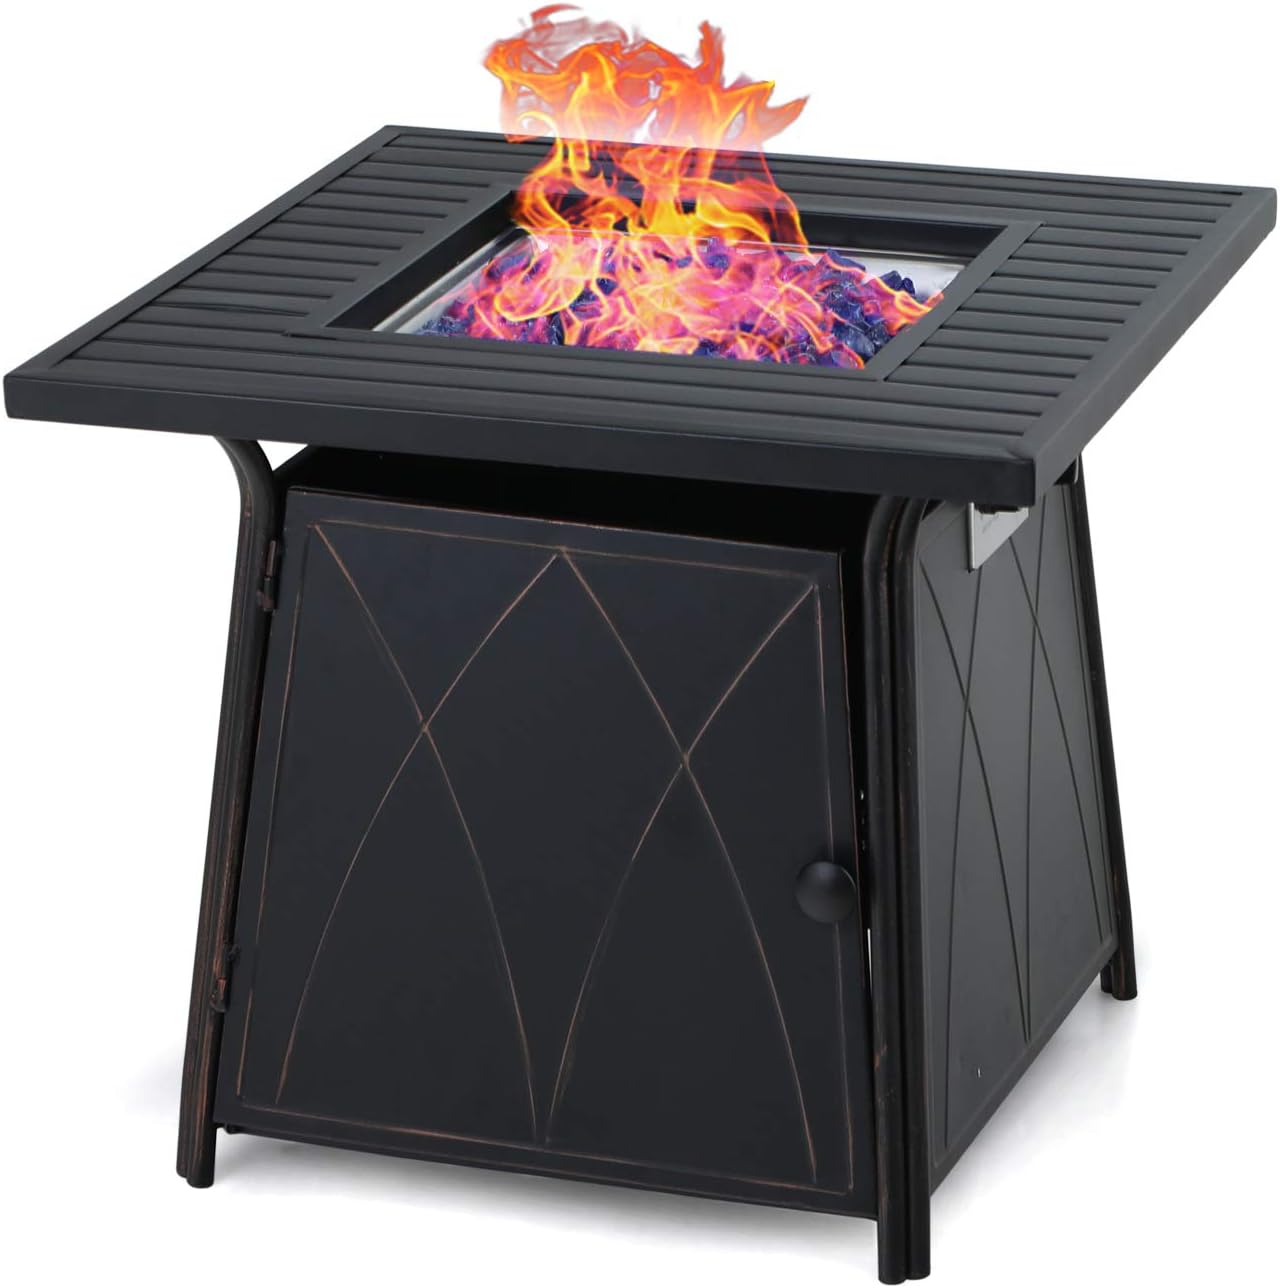 Note: I got the 29 square modelDon't come for me, but I cannot stand the smell of fire/smoke; I hate everything about the lingering smell it leaves on my clothes and hair and it stings my eyes. I have wanted a propane fire pit since my mom got one for her patio and I was so excited to finally get one. Yes, my timing is off as it is now winter in Ohio, but (knock on wood) we have only had one weekend of terrible weather so far. The day I got this, it was 30 degrees out, so assembly was a little 